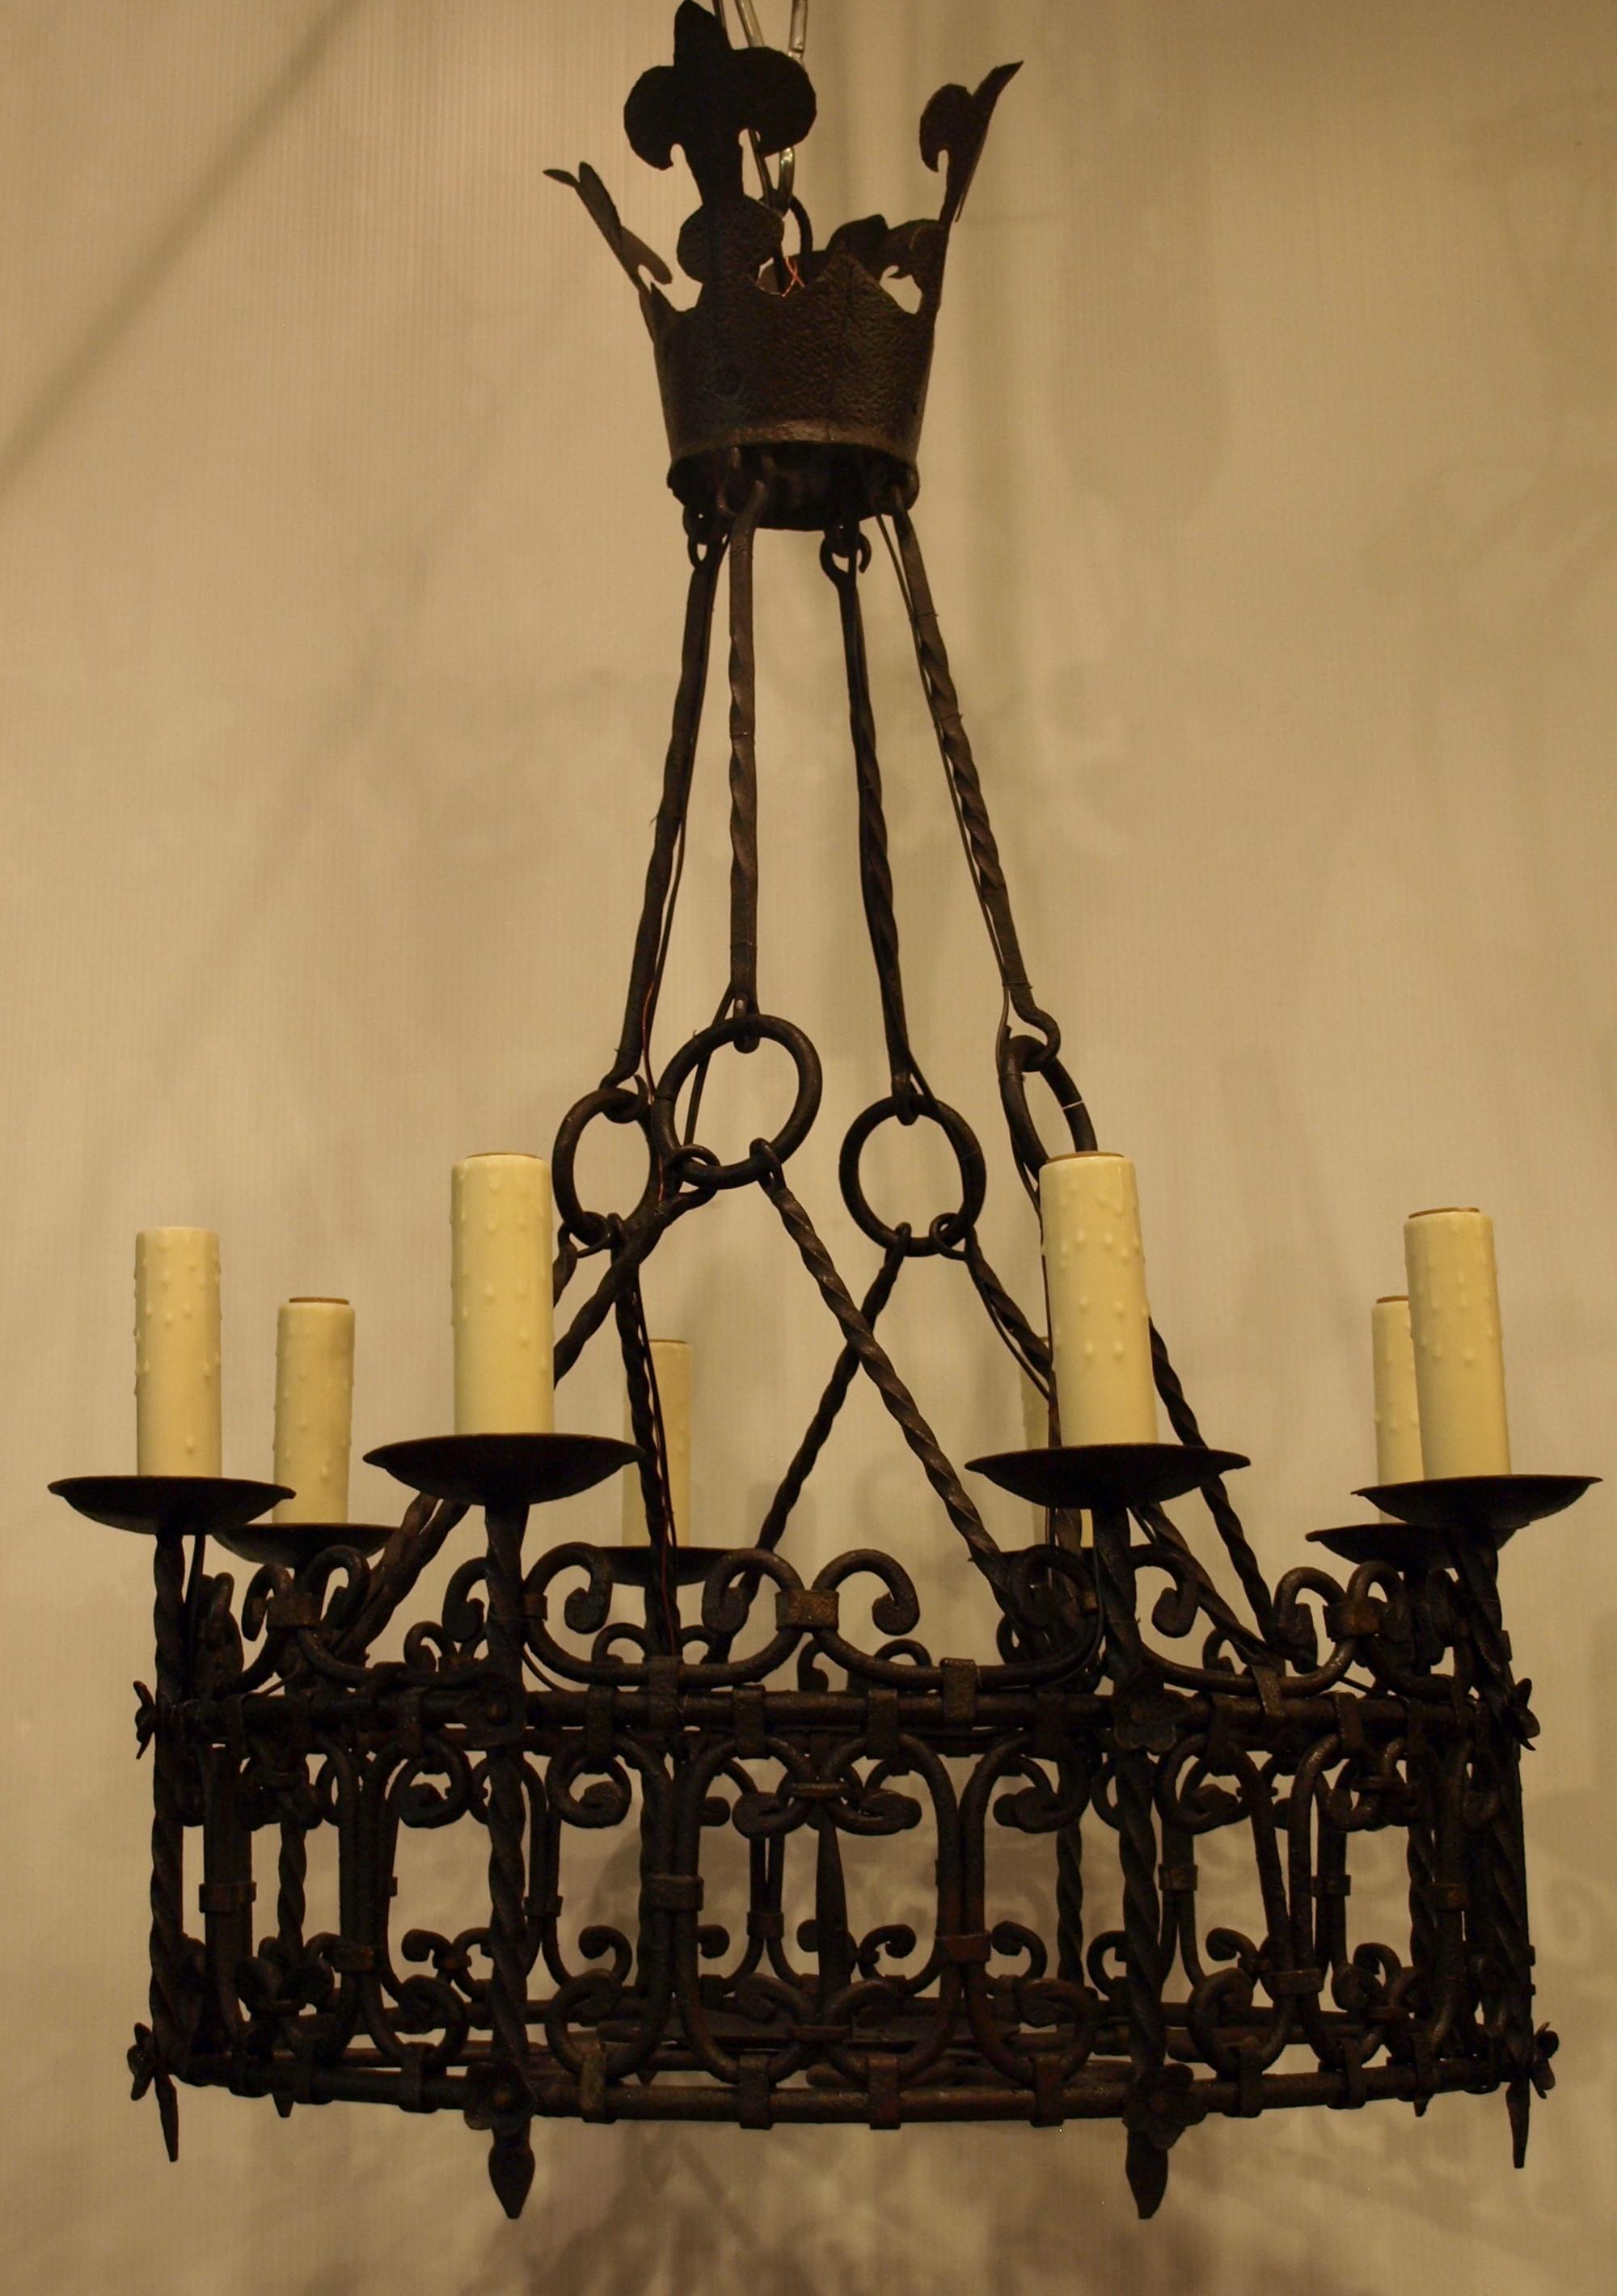 A very fine French provincial iron chandelier. Exquisite, delicate and highly skilled ironwork. Likely created to be used with candles, now electrified. France, circa 1890.
8 lights
Dimensions: Height 36